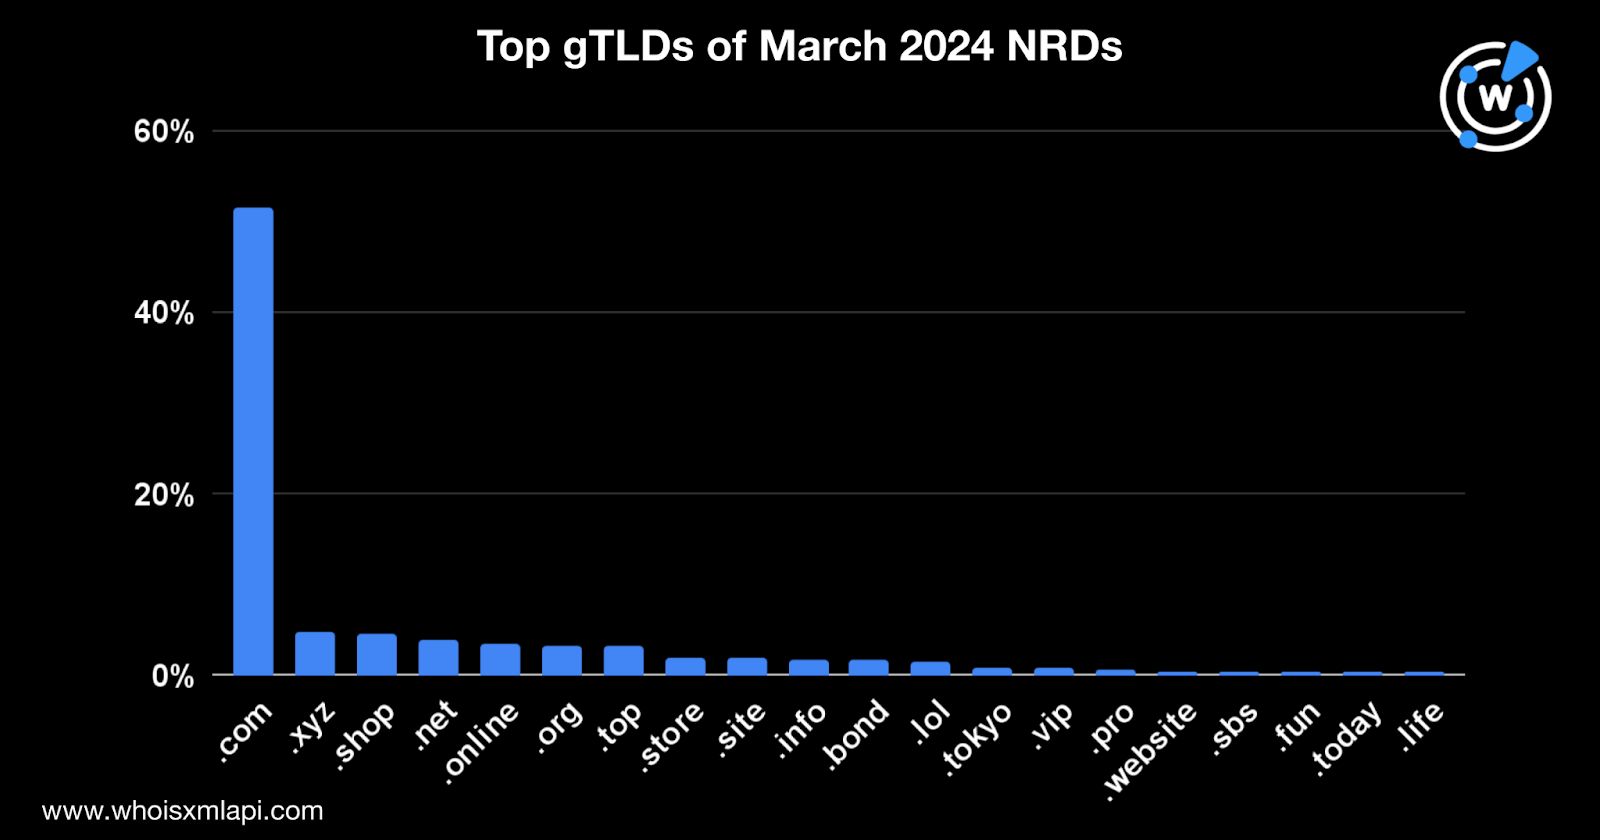 Top gTLDs of March 2024 NRDs